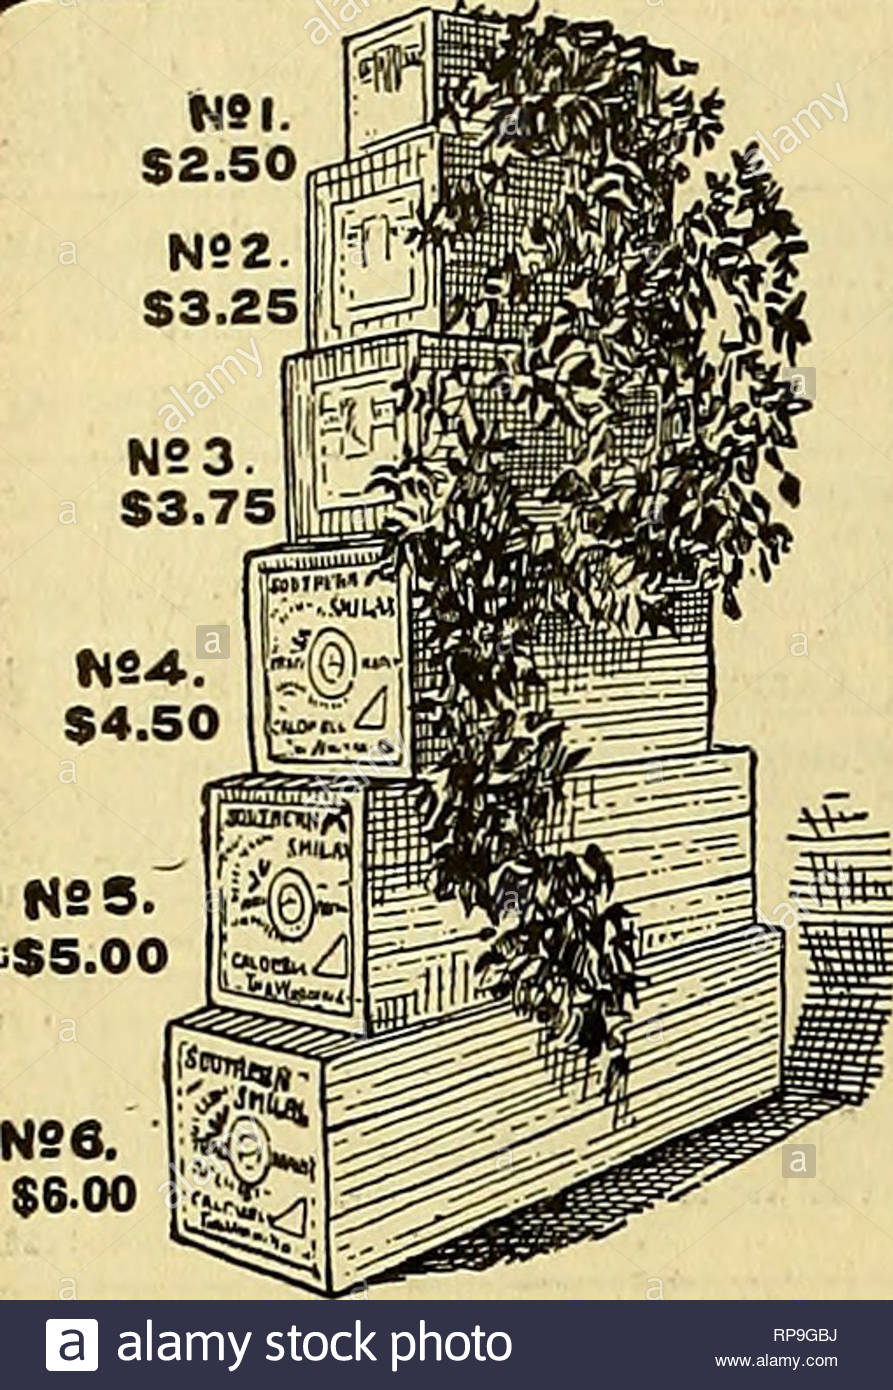 the american florist a weekly journal for the trade floriculture florists 48 the american florist feb 7 msi 250 x u l i p s i quantity per doz american beauties extra select 400 to 500 18to34in 250 to 300 latolsin 150 to 200 per 100 brides bridesmaids and ivory 500 to 1000 meteor golden gates 500 to 1000 liberty 500 to 1200 violetsdouble100to150 violets single 75 to 100 white violets 300 carnations 20j to 300 lily of the valley selected extra long 500 quotquot as good as can be had elsewhere 300 to 400 narcissus paper w RP9GBJ